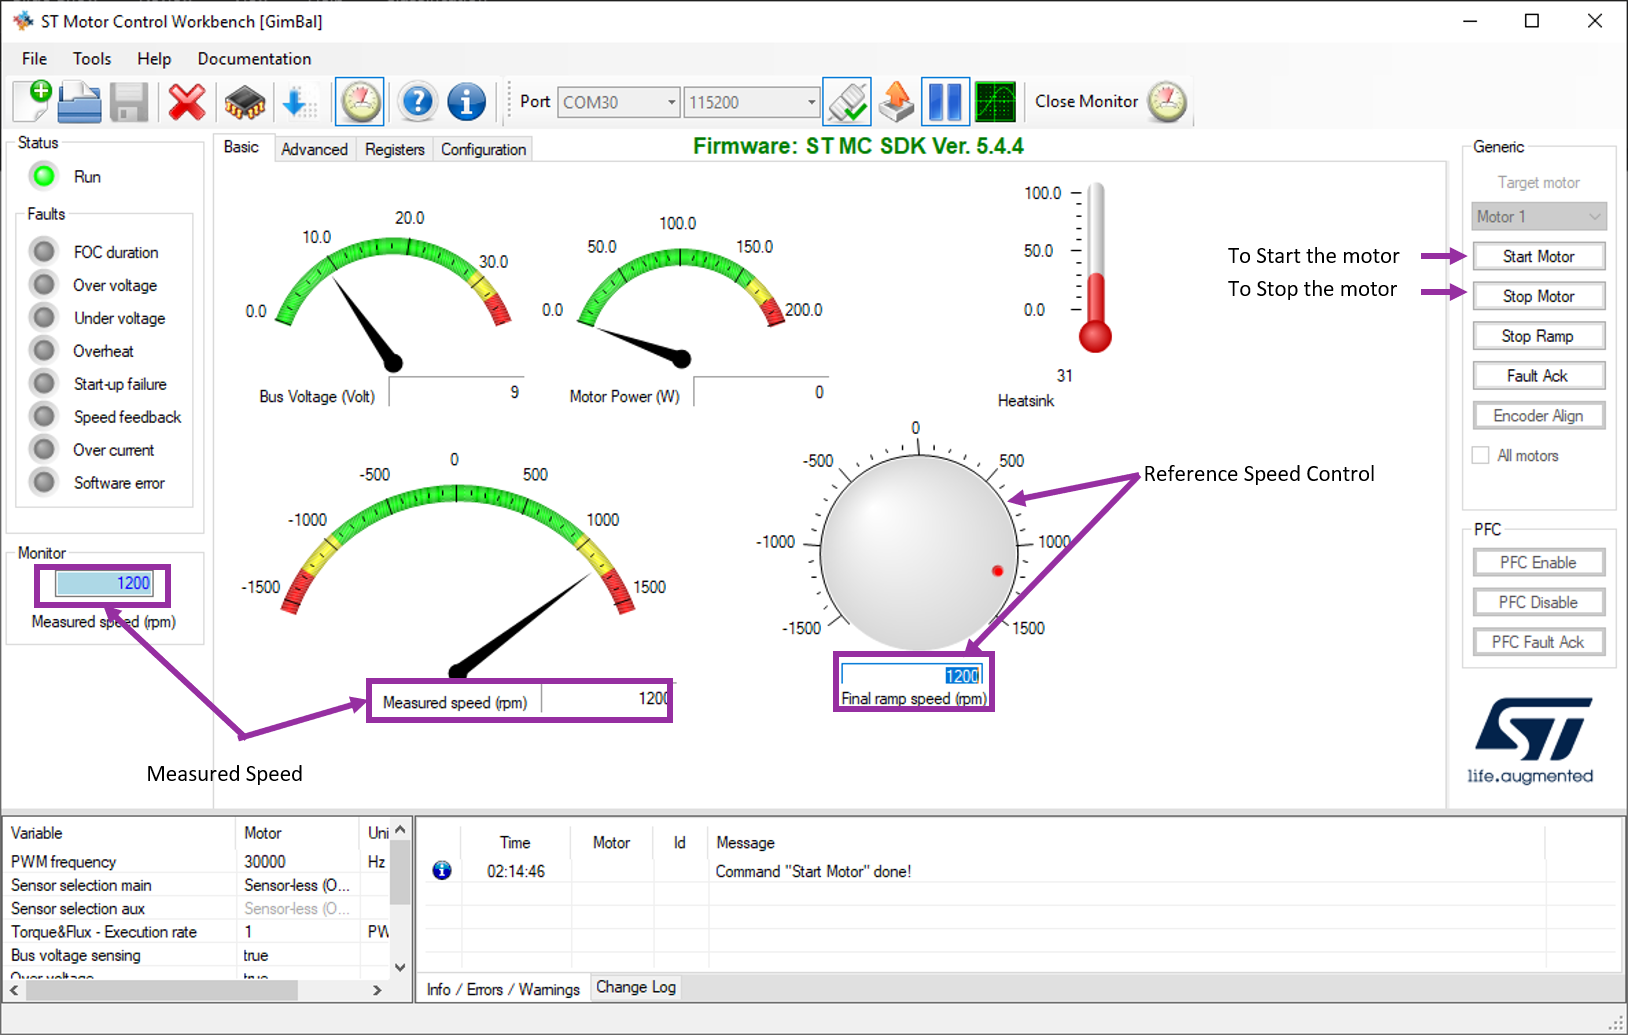 Controlling the motor with the Motor Control Monitor